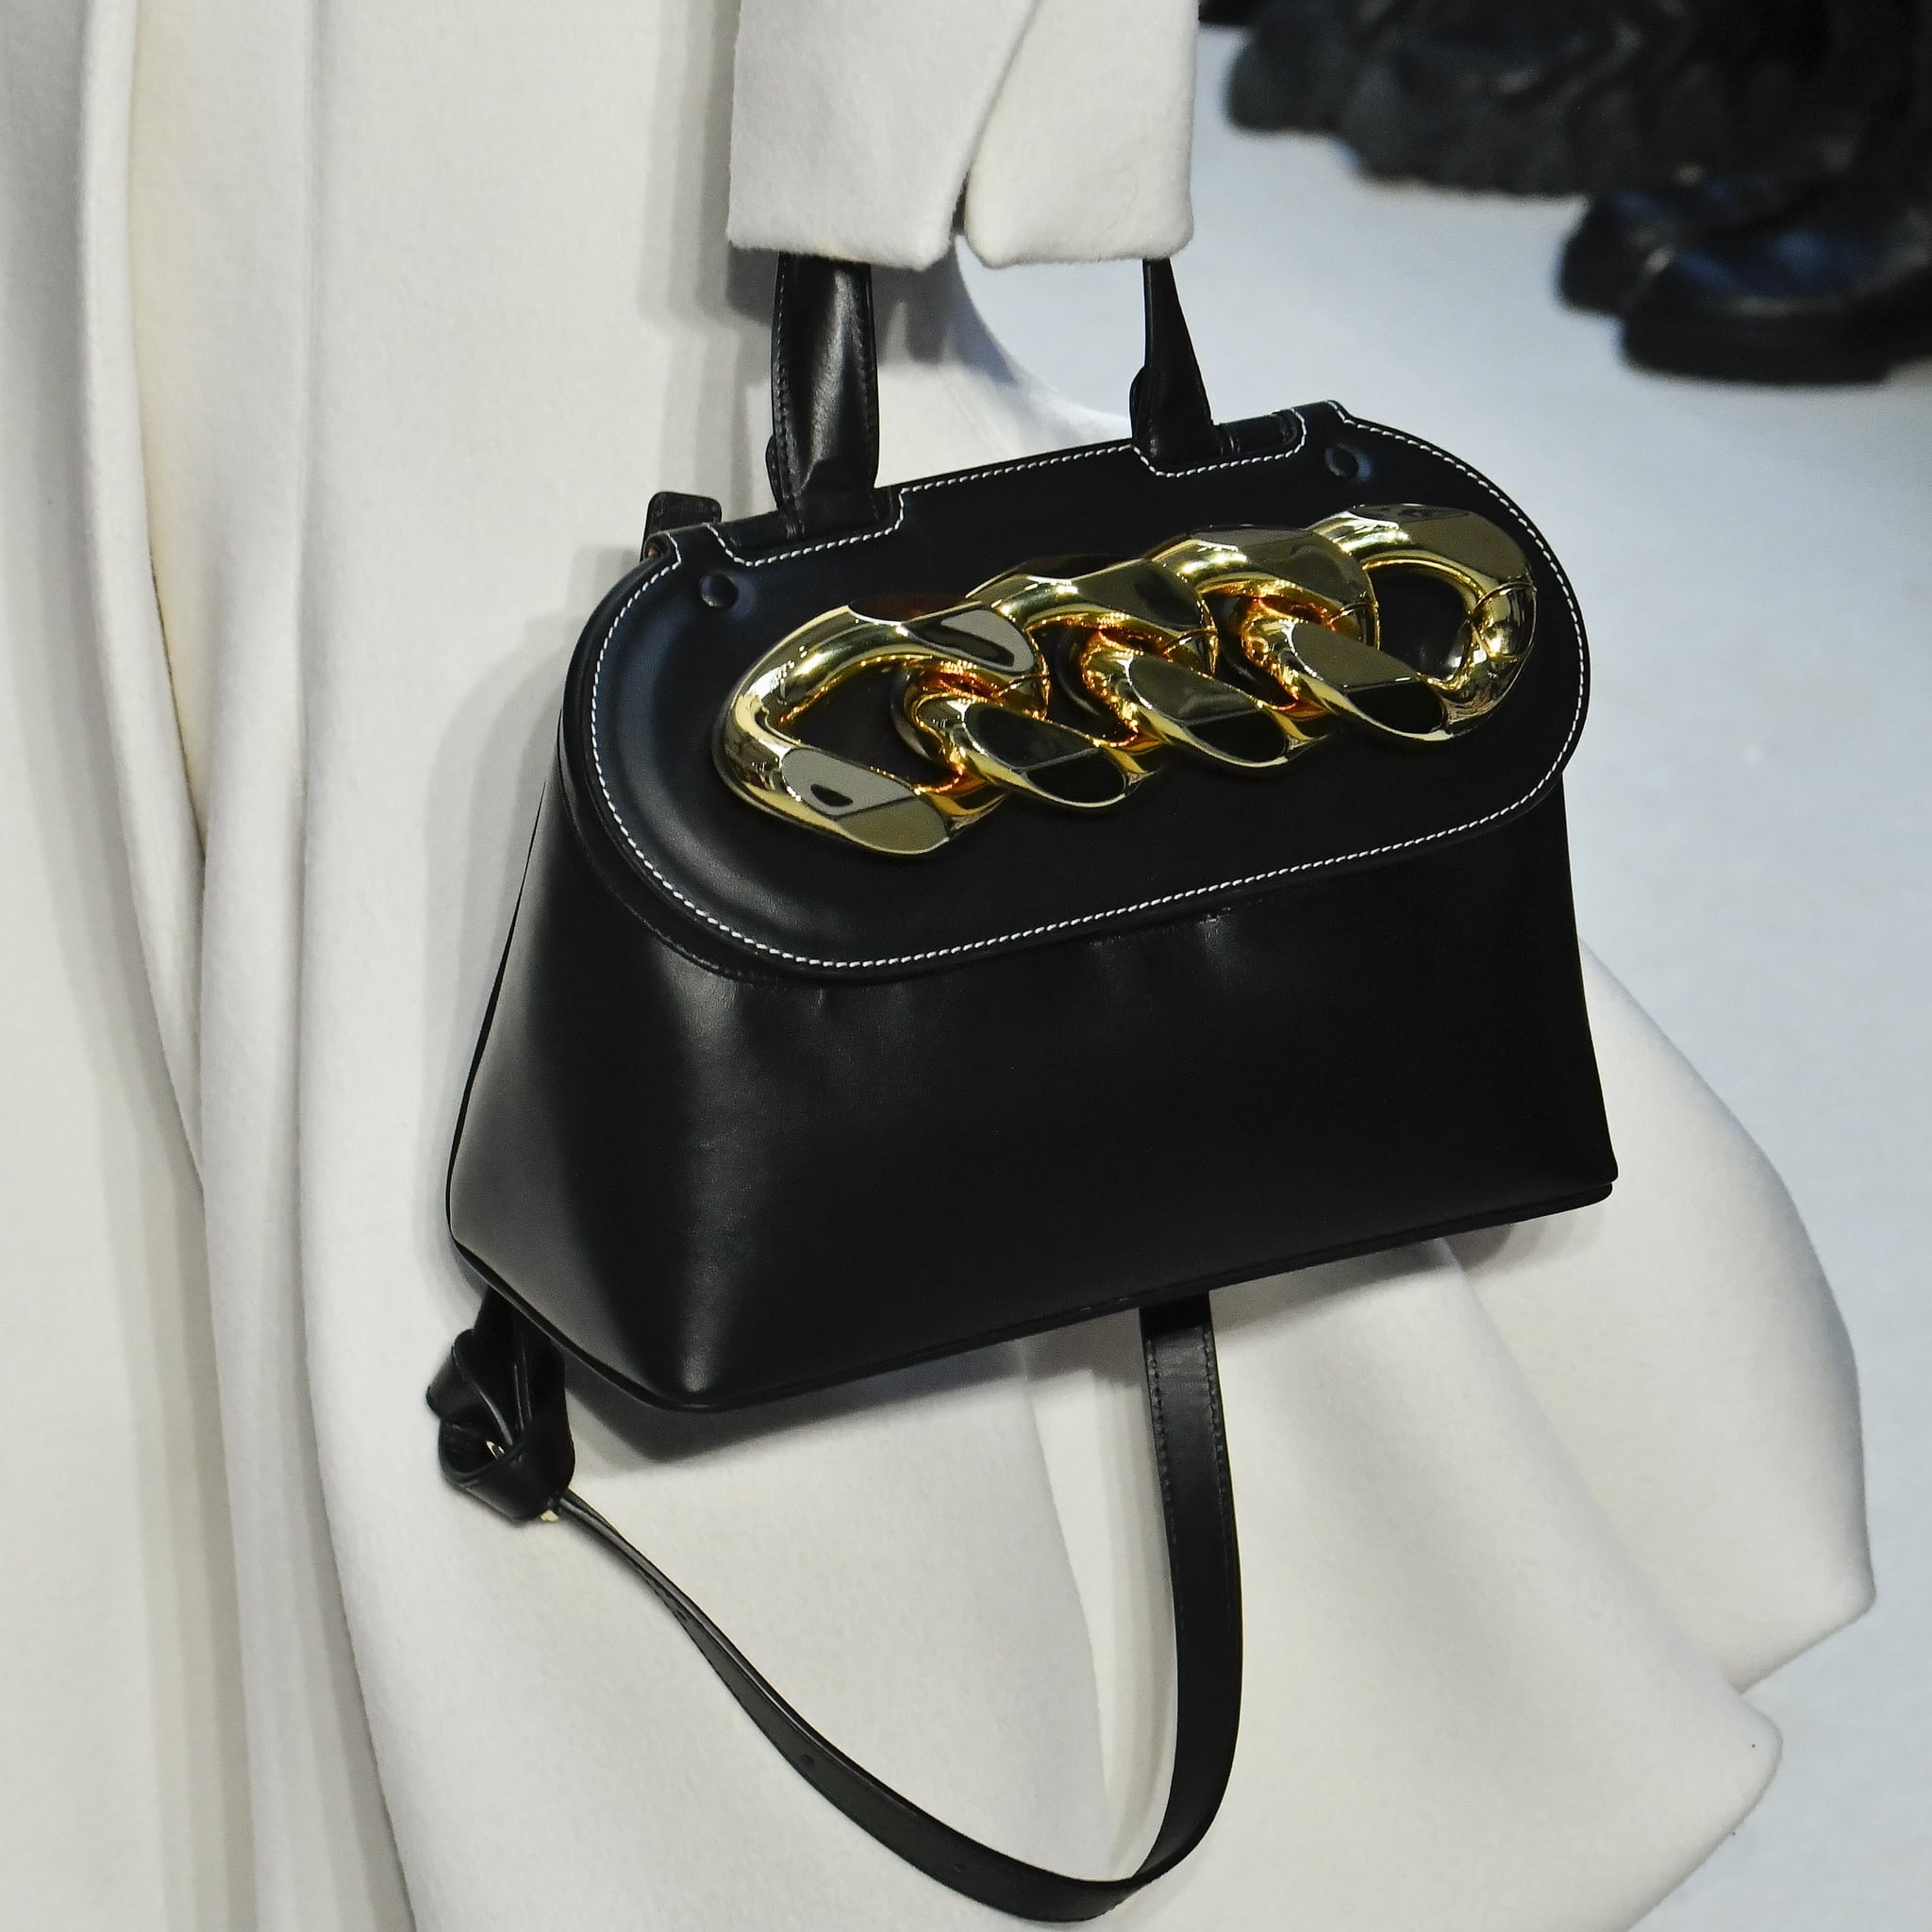 Fall Bag Trends 2020: 9 Luxury Looks To Style Right Now – StyleCaster